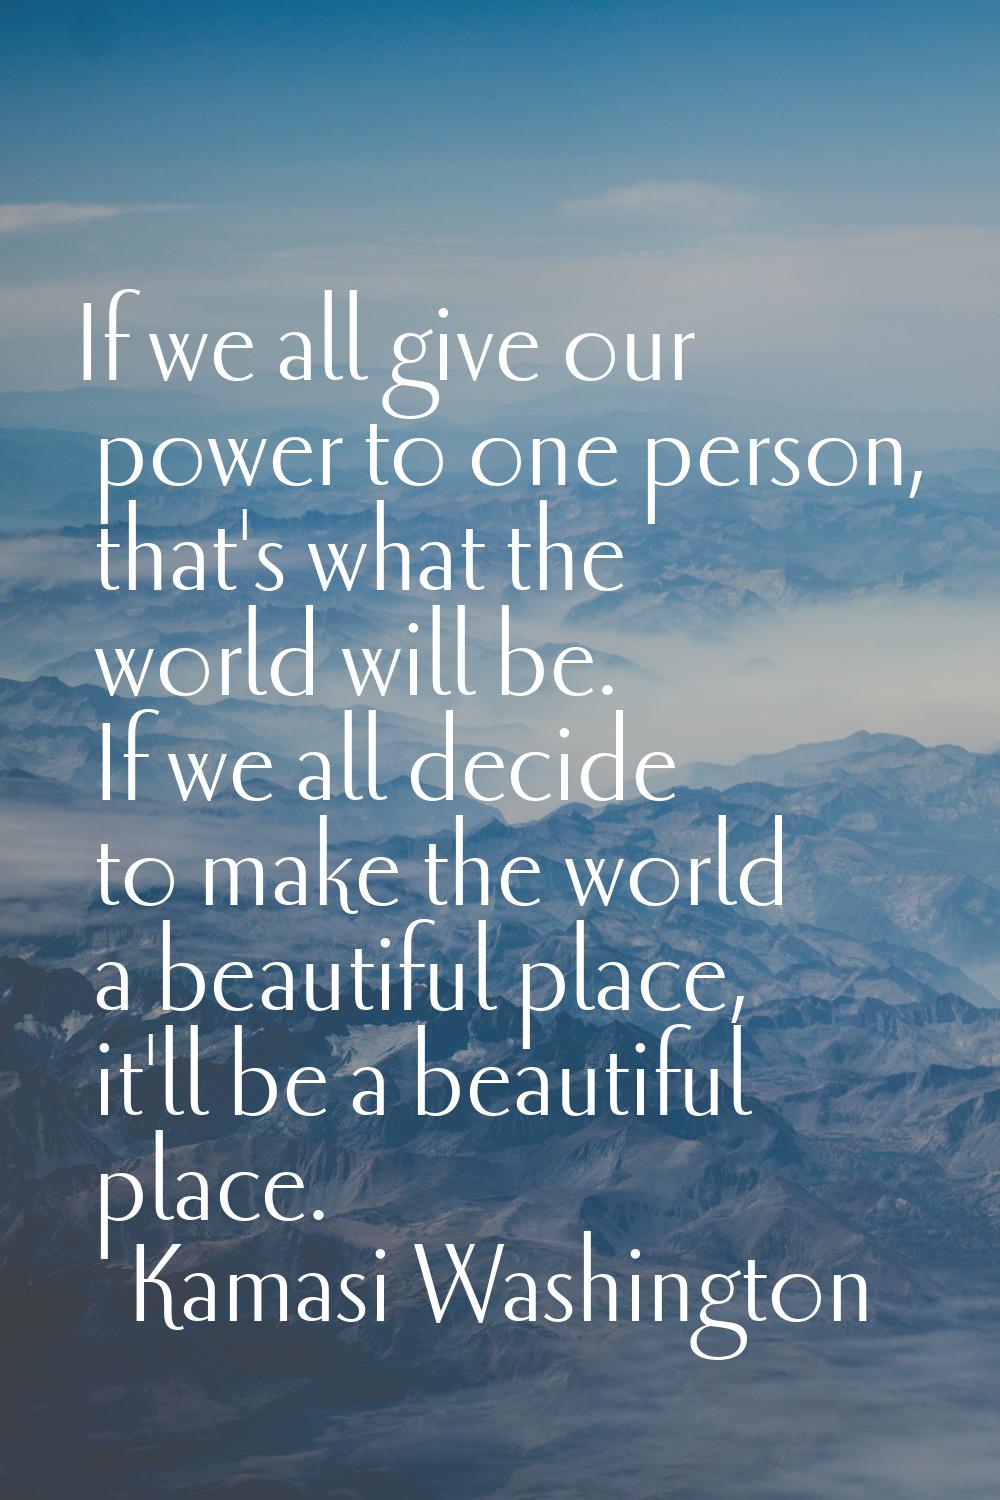 If we all give our power to one person, that's what the world will be. If we all decide to make the